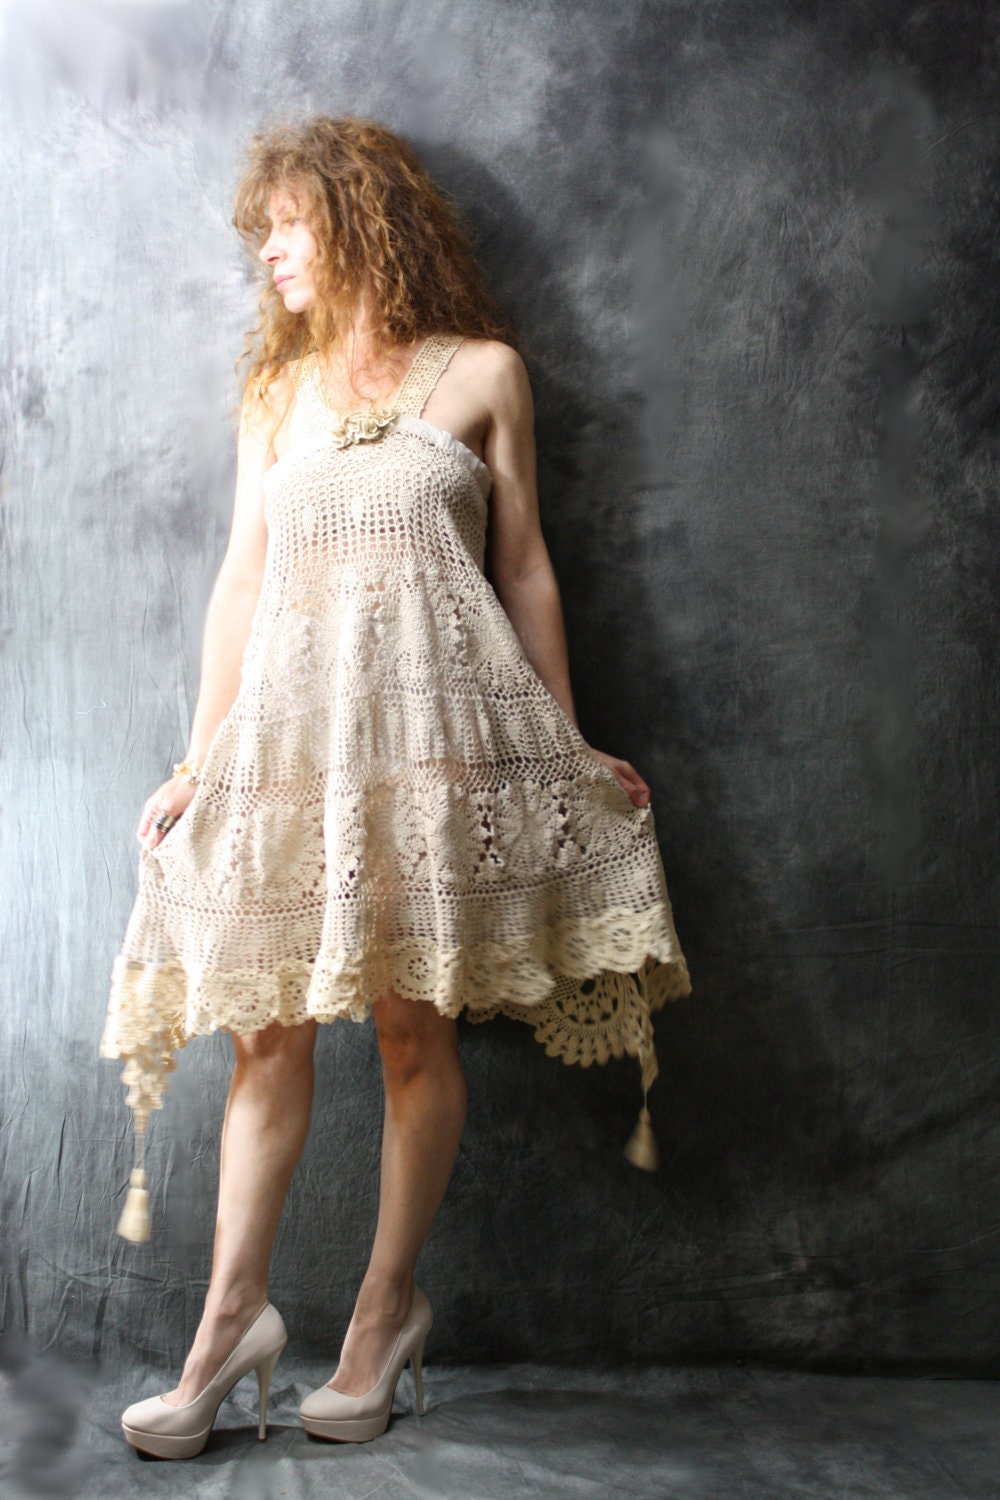 Made To Order Romantic Beach Wedding Vintage Crochet  Doily Lace Dress Upcycled Reconstructed Handmade OOAK - MajikHorse